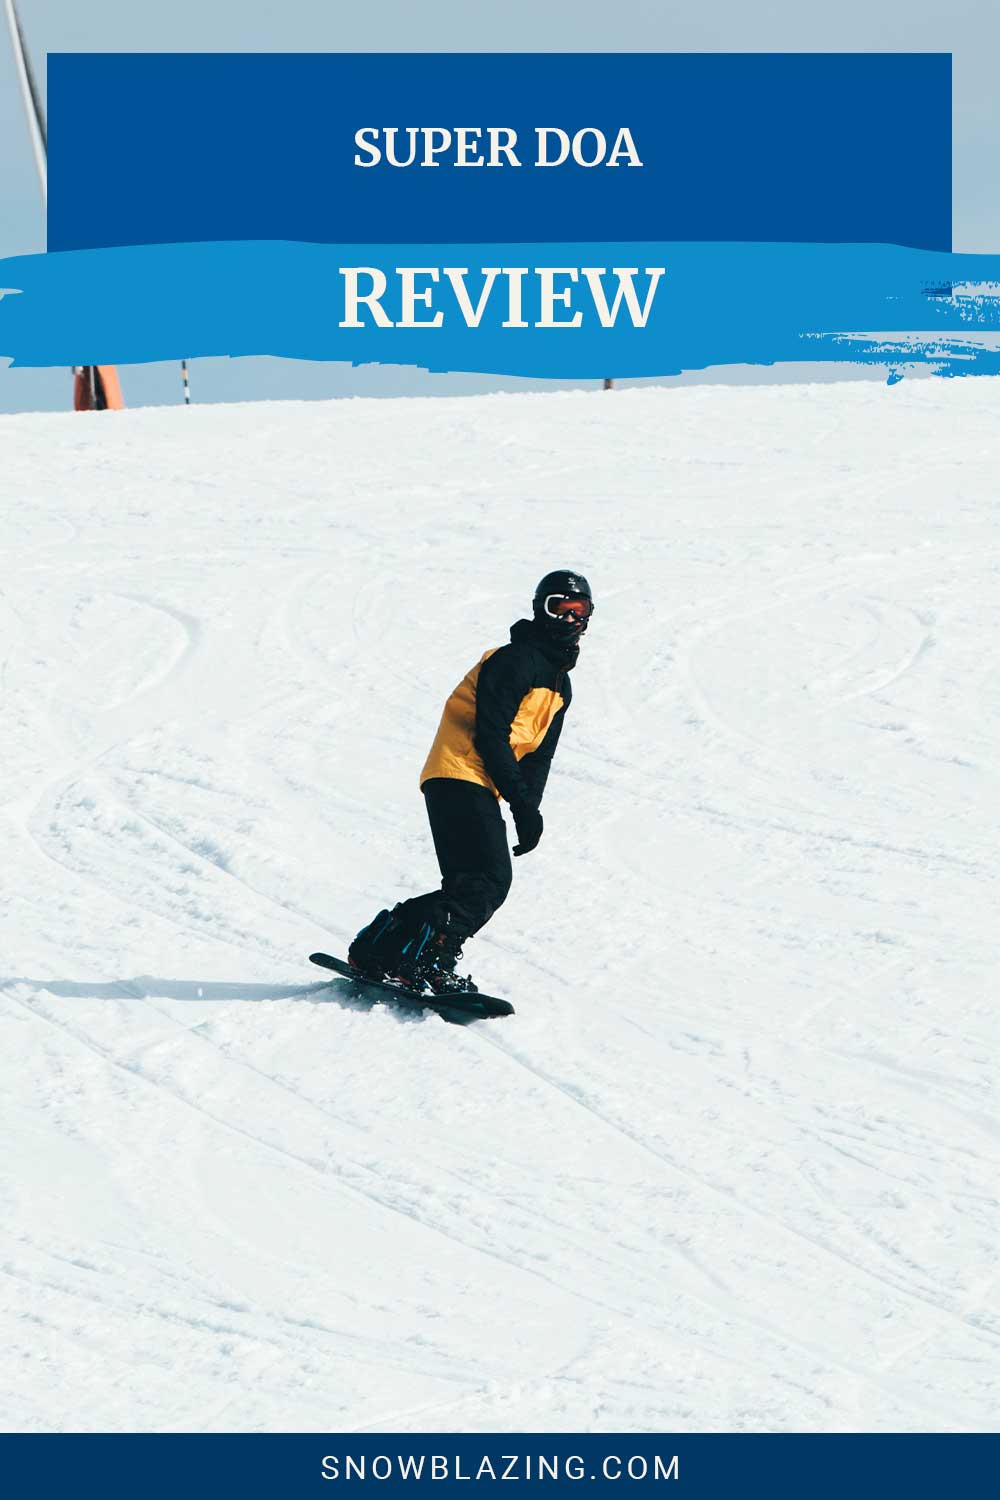 Man in yellow jacket with black sleeves snowboarding - Super DOA review